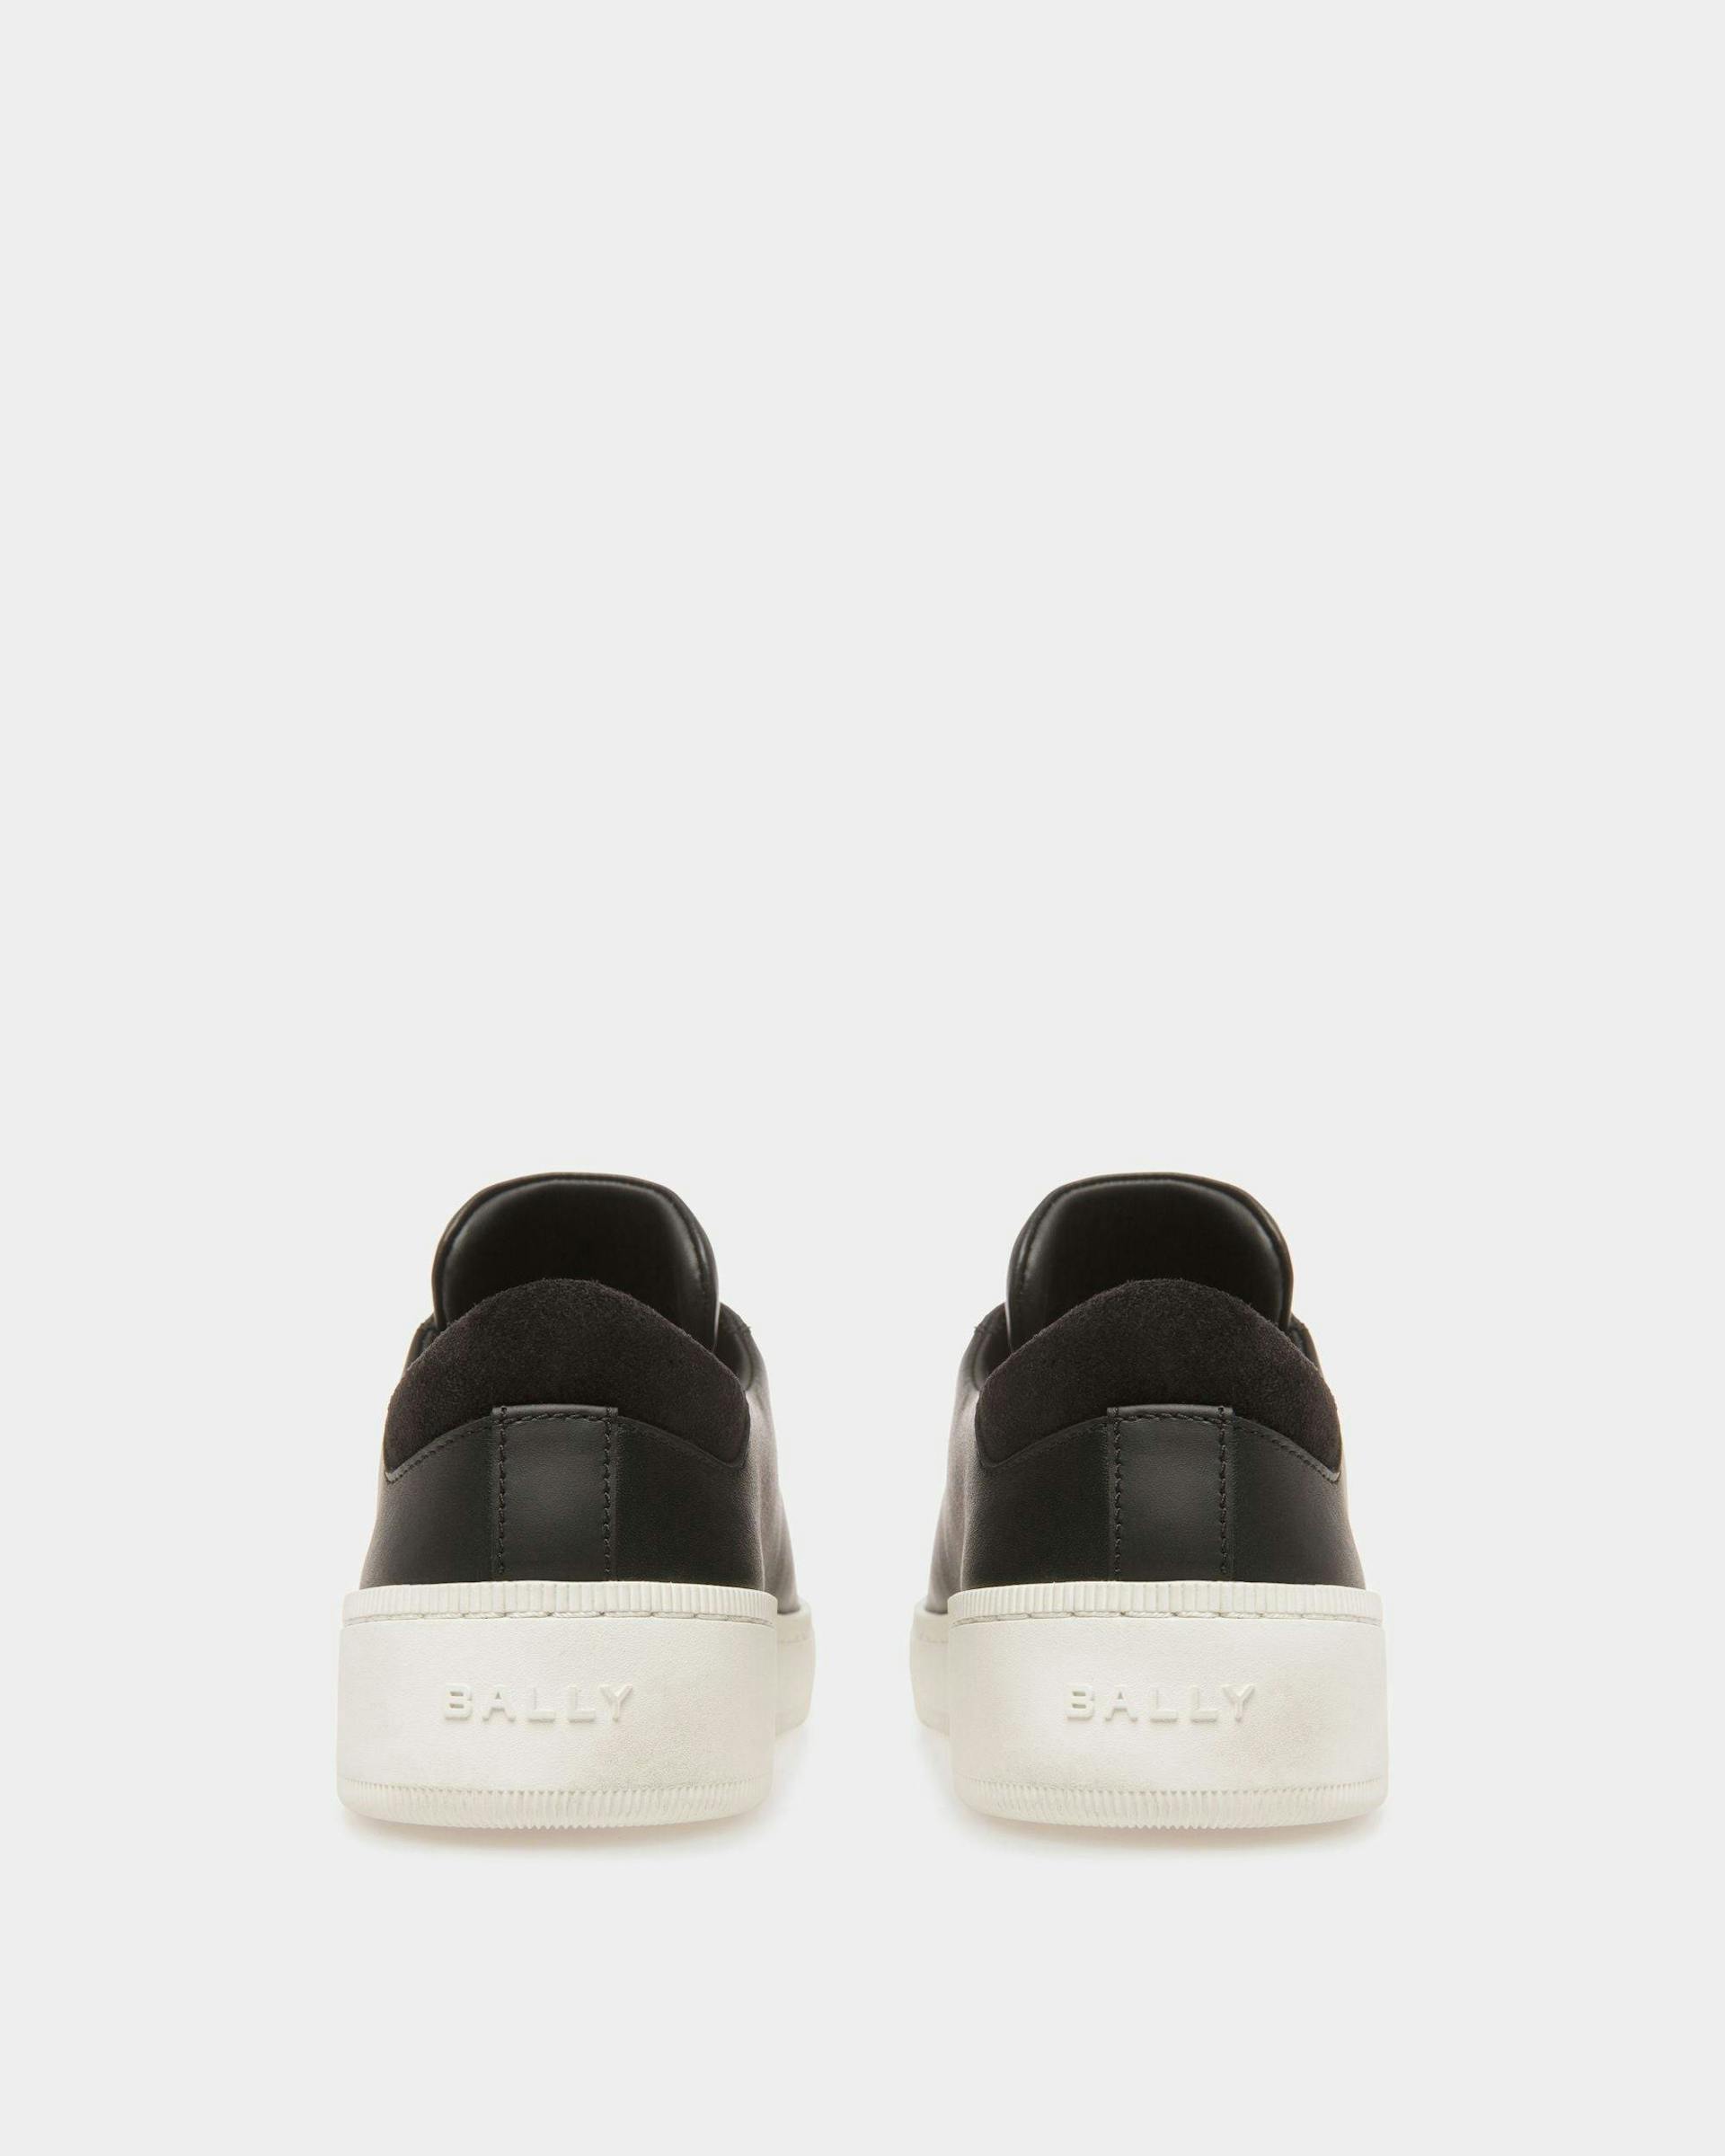 Women's Raise Sneakers In Black And White Leather | Bally | Still Life Below